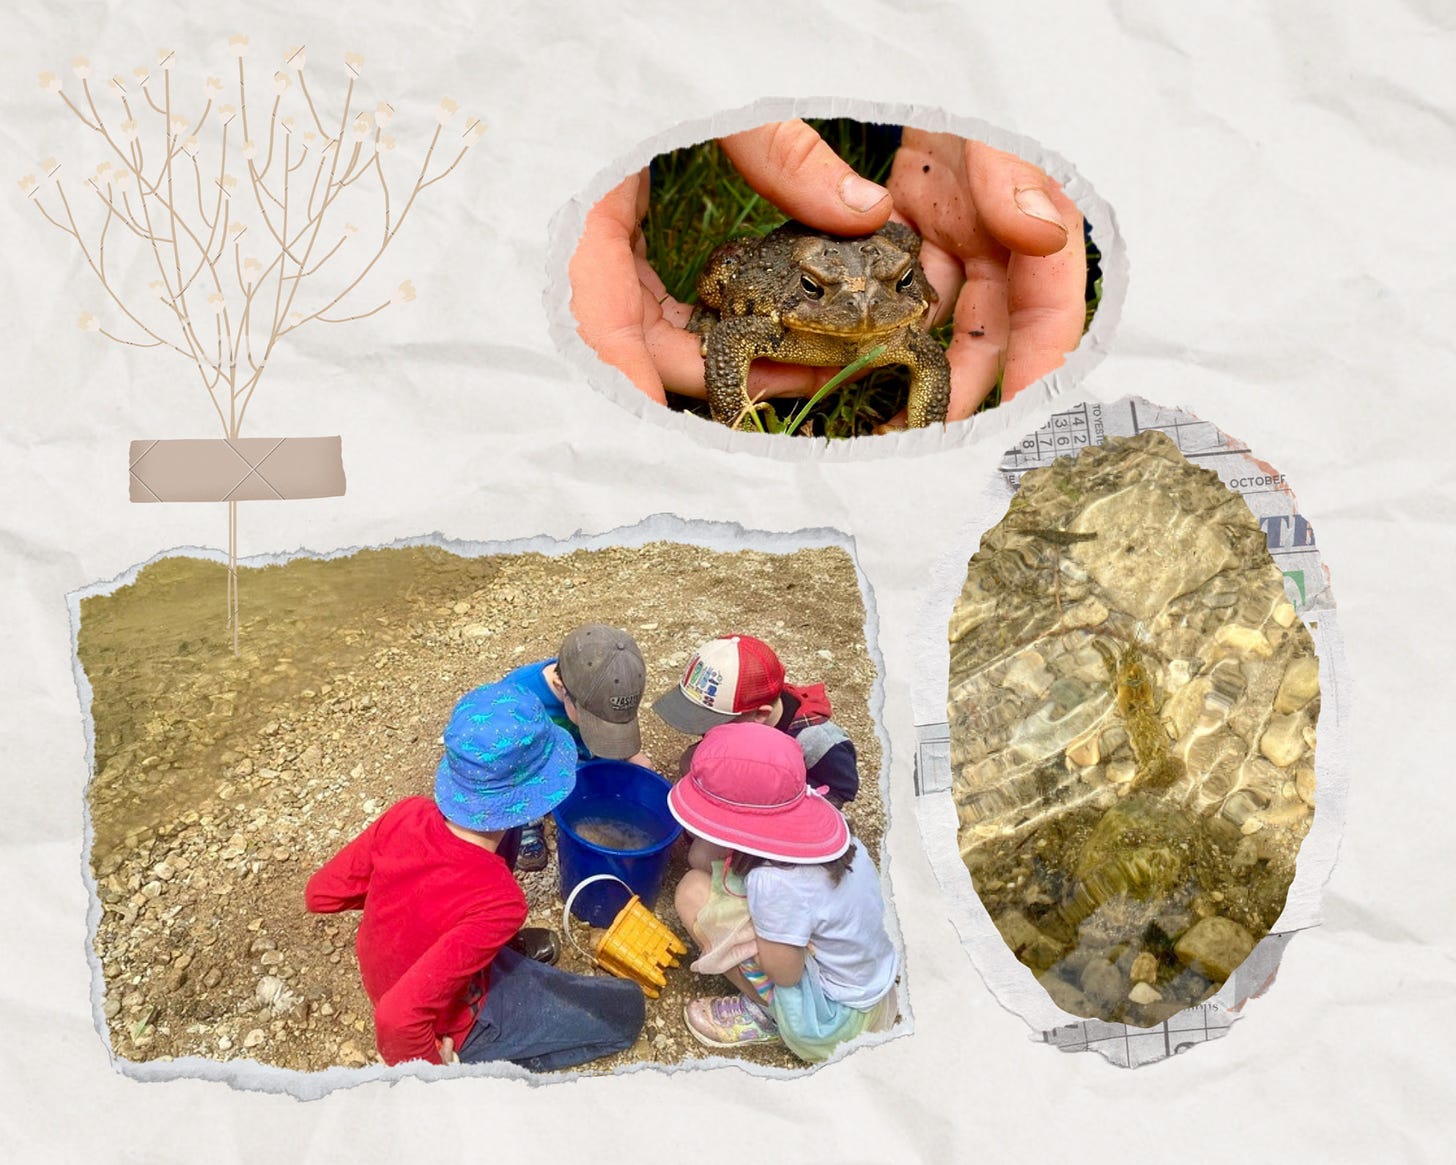 collage: photo 1 of hands holding American toad; photo 2 of children looking at a bucket with fish in it; photo 3 of a crayfish on creekbed